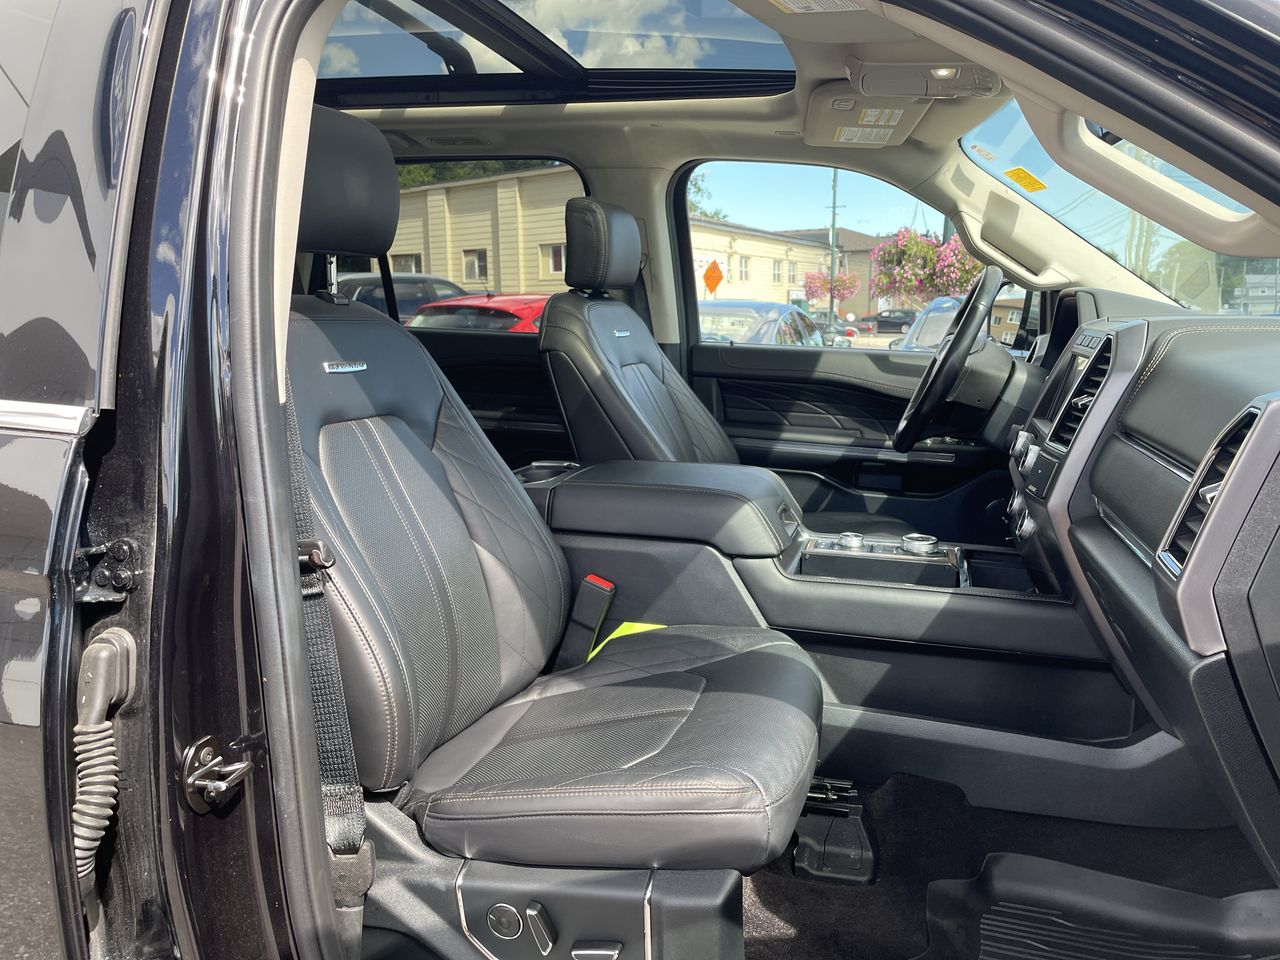 2021 Ford Expedition - P21237 Full Image 27